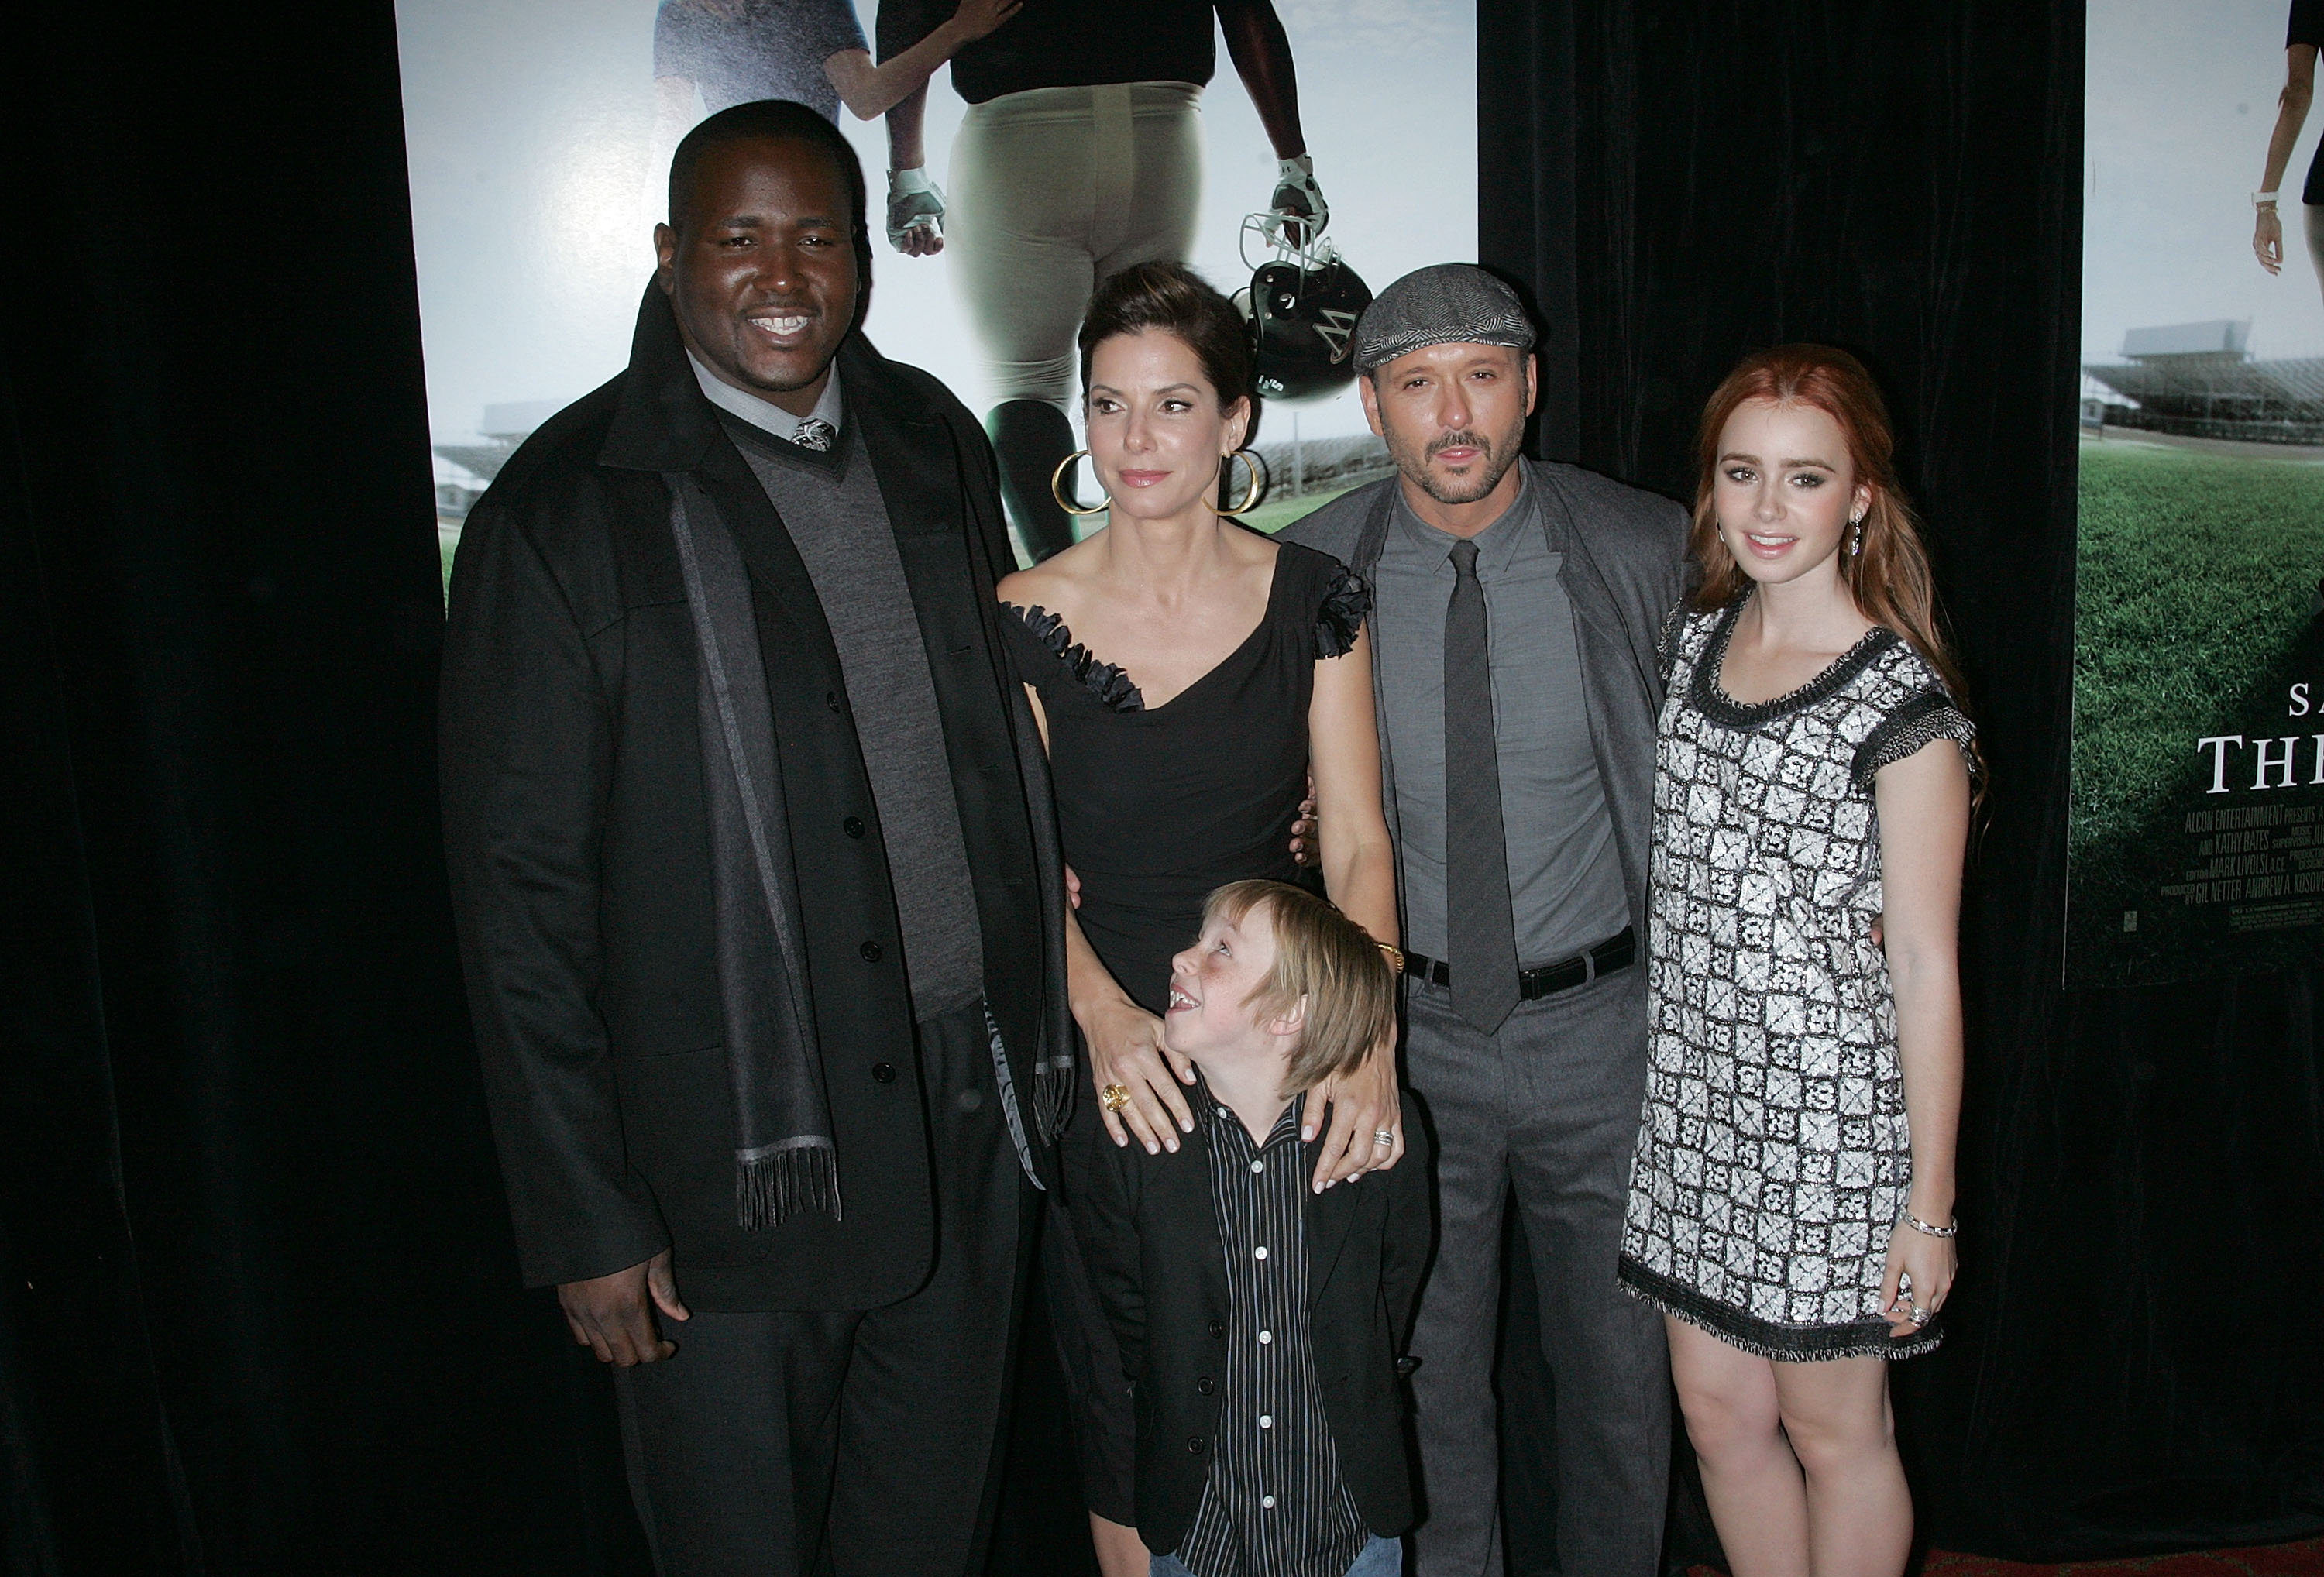 Cast of "The Blind Side" at "The Blind Side" premiere on November 17, 2009, in New York City. | Source: Getty Images